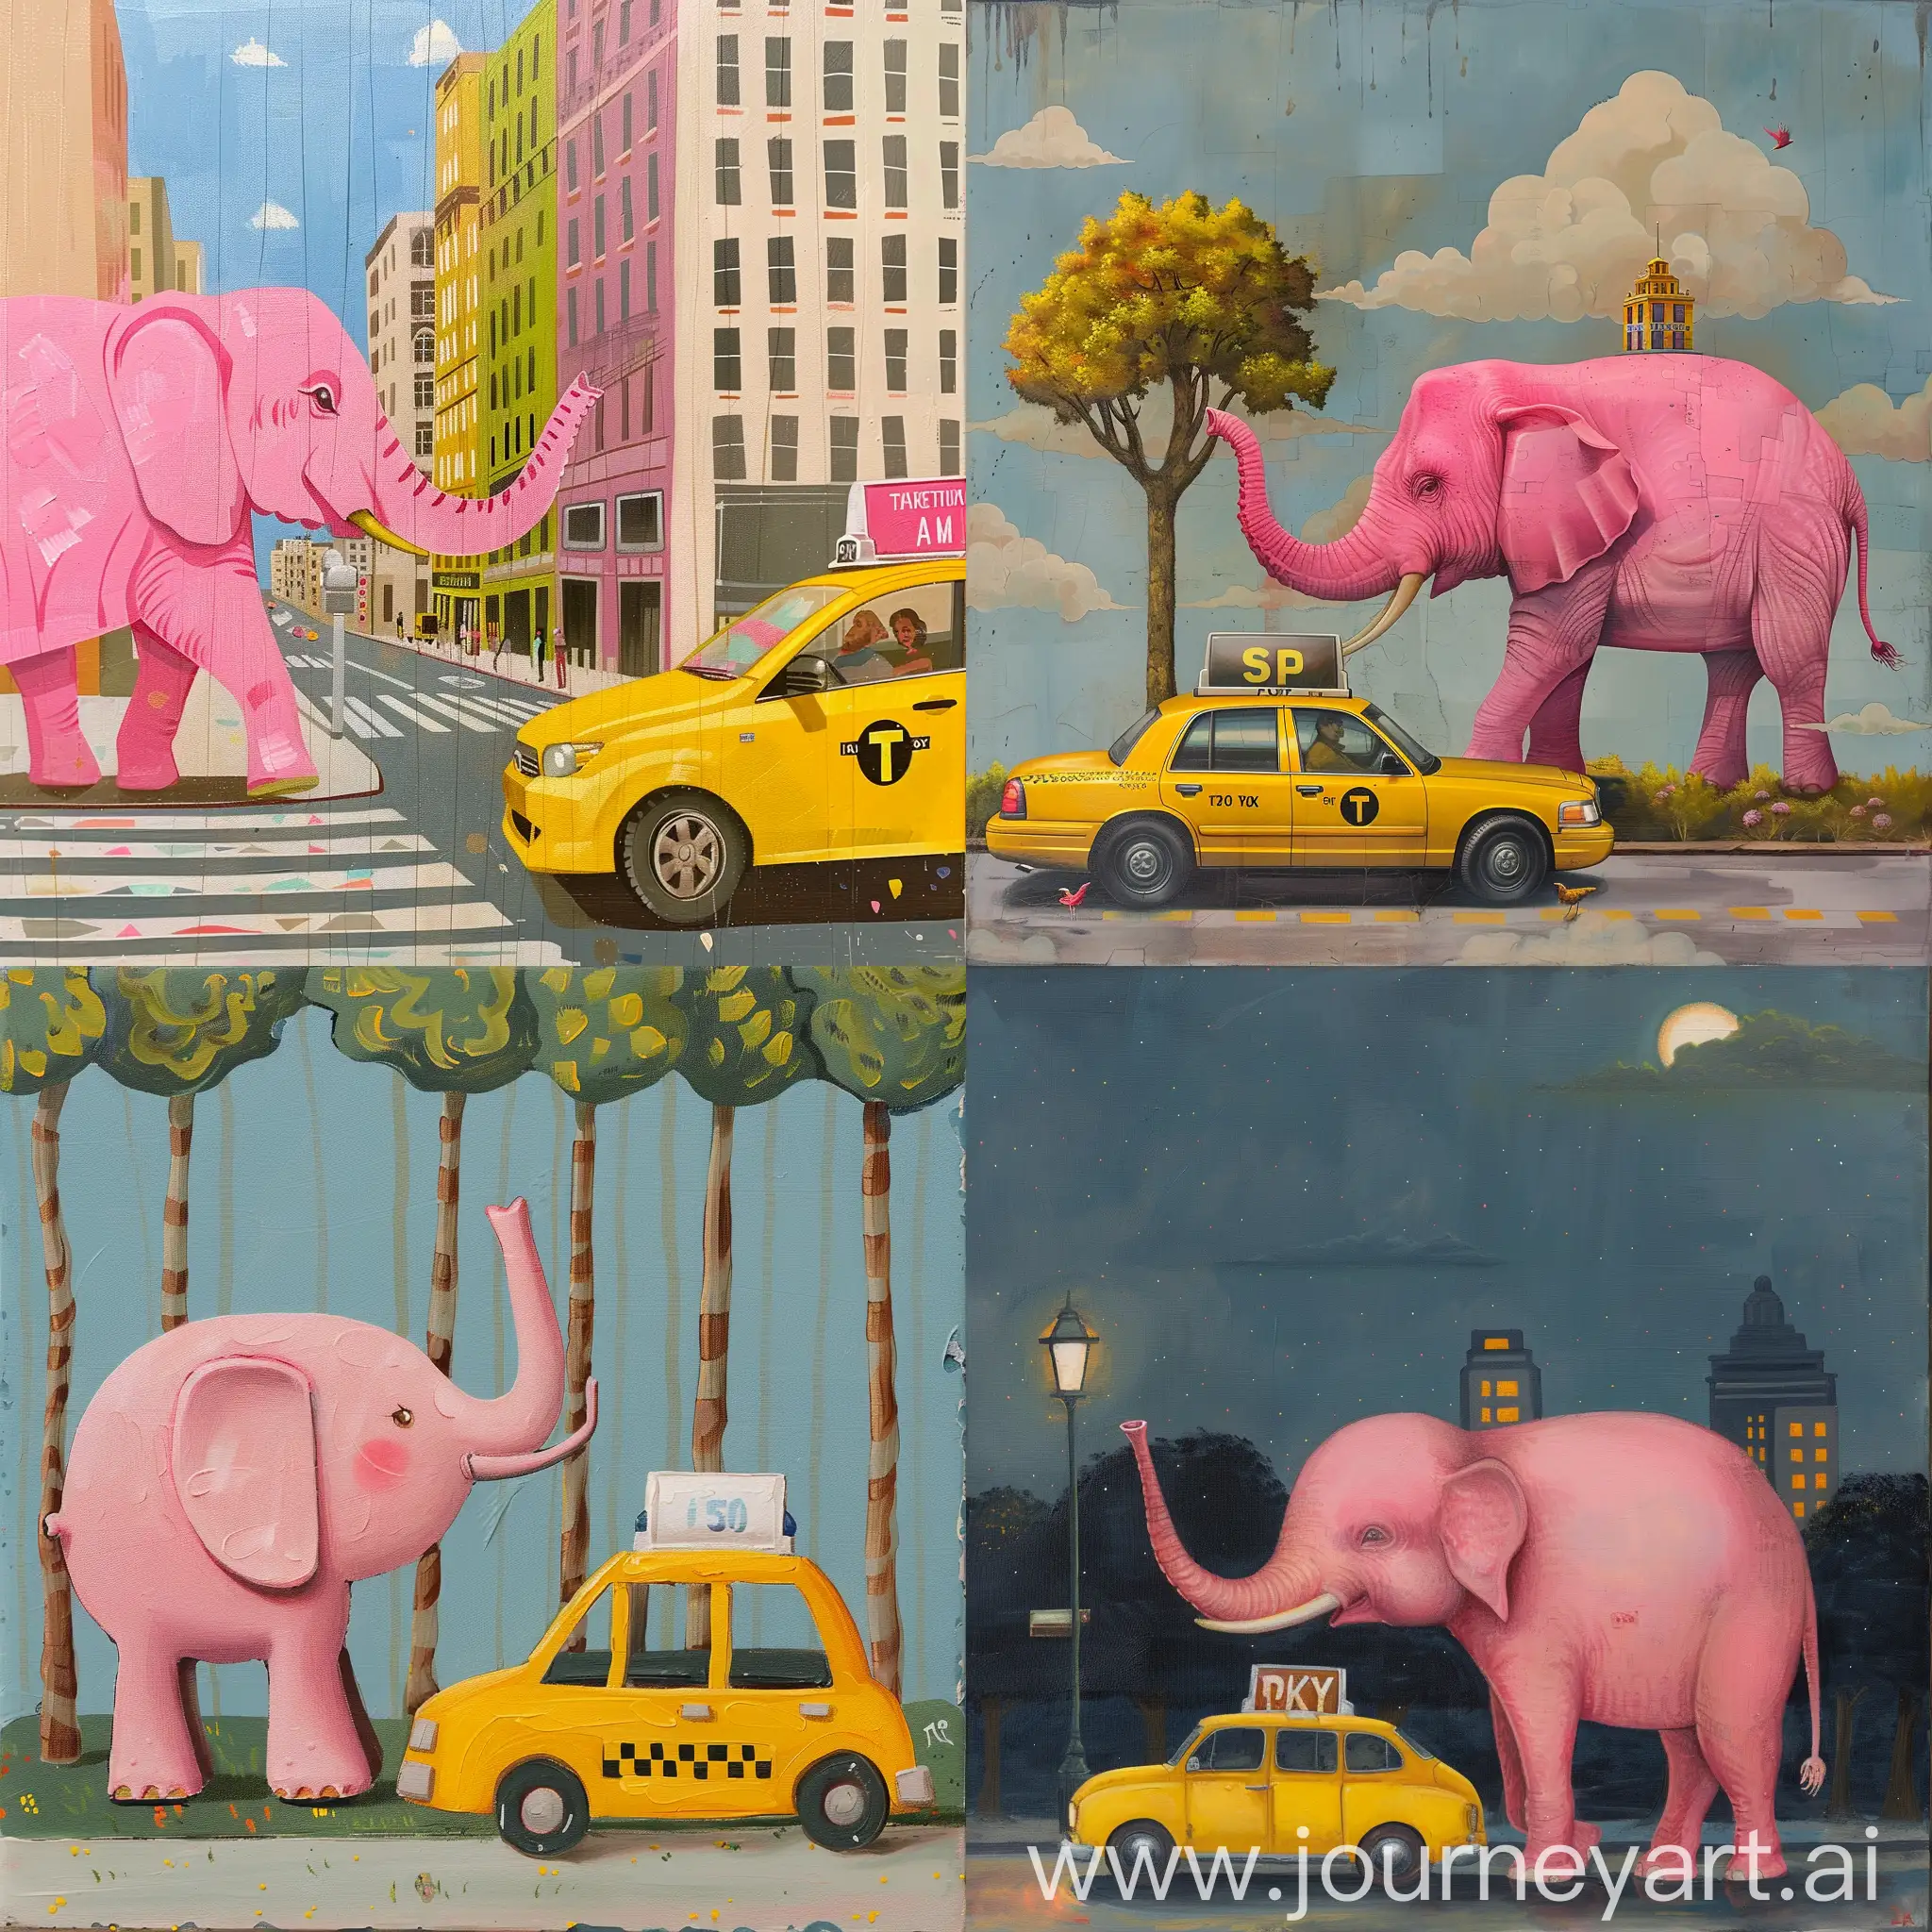 pink elephant and yellow taxi